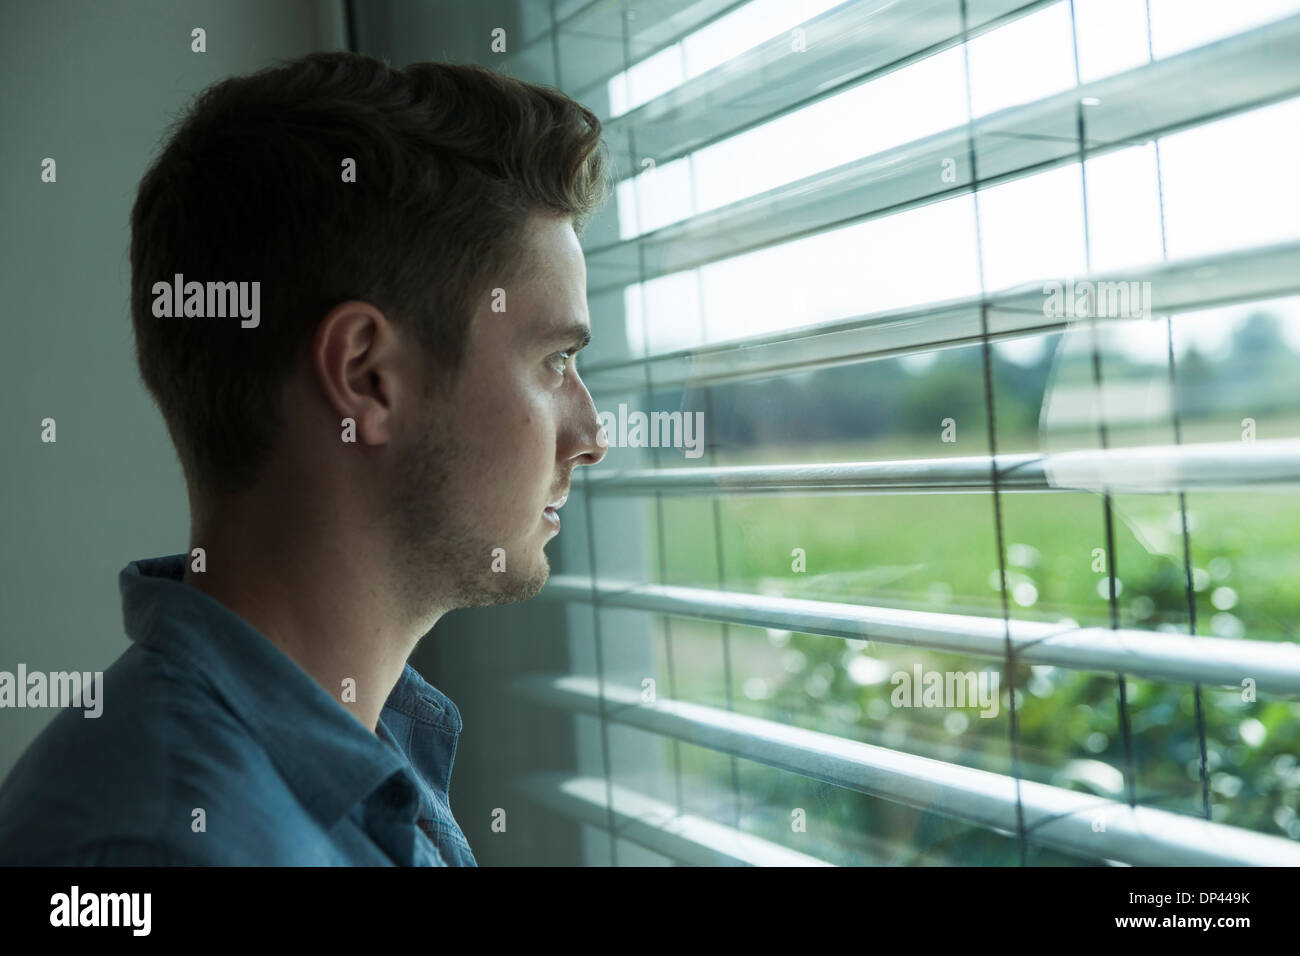 Close-up portrait of young man, looking out window through blinds, Germany Stock Photo